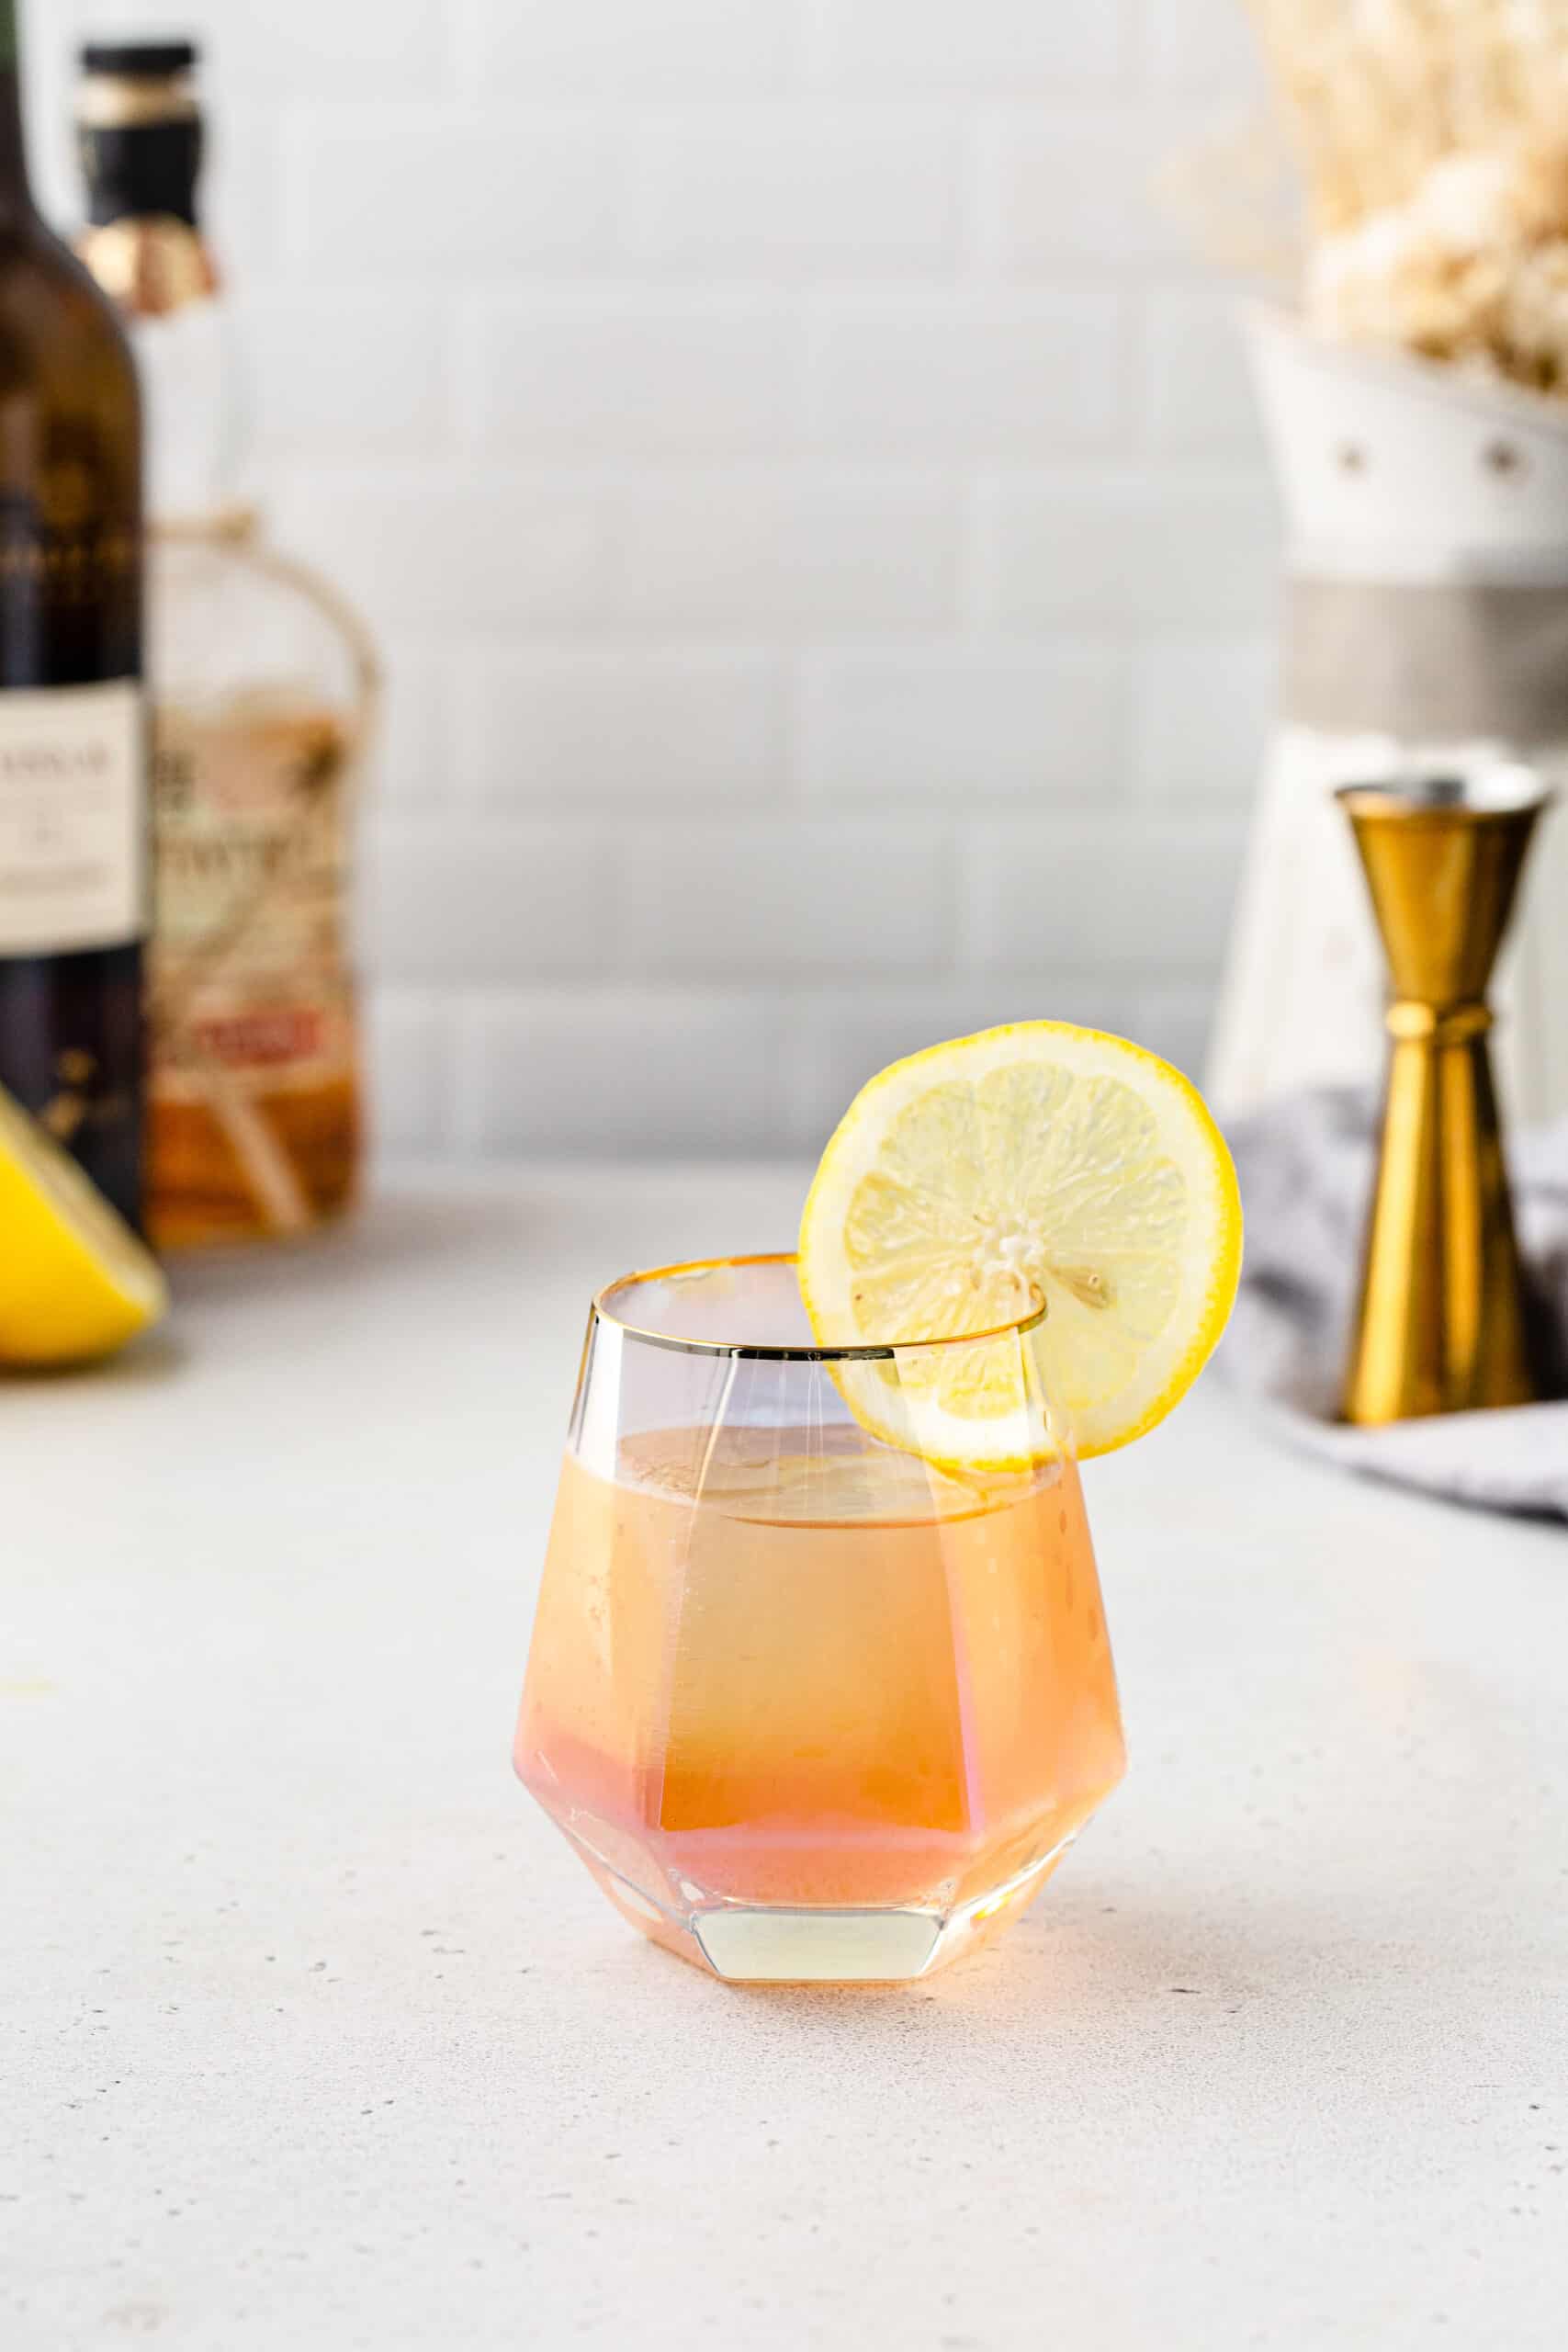 sherry and rum cocktail in an iridescent cocktail glass